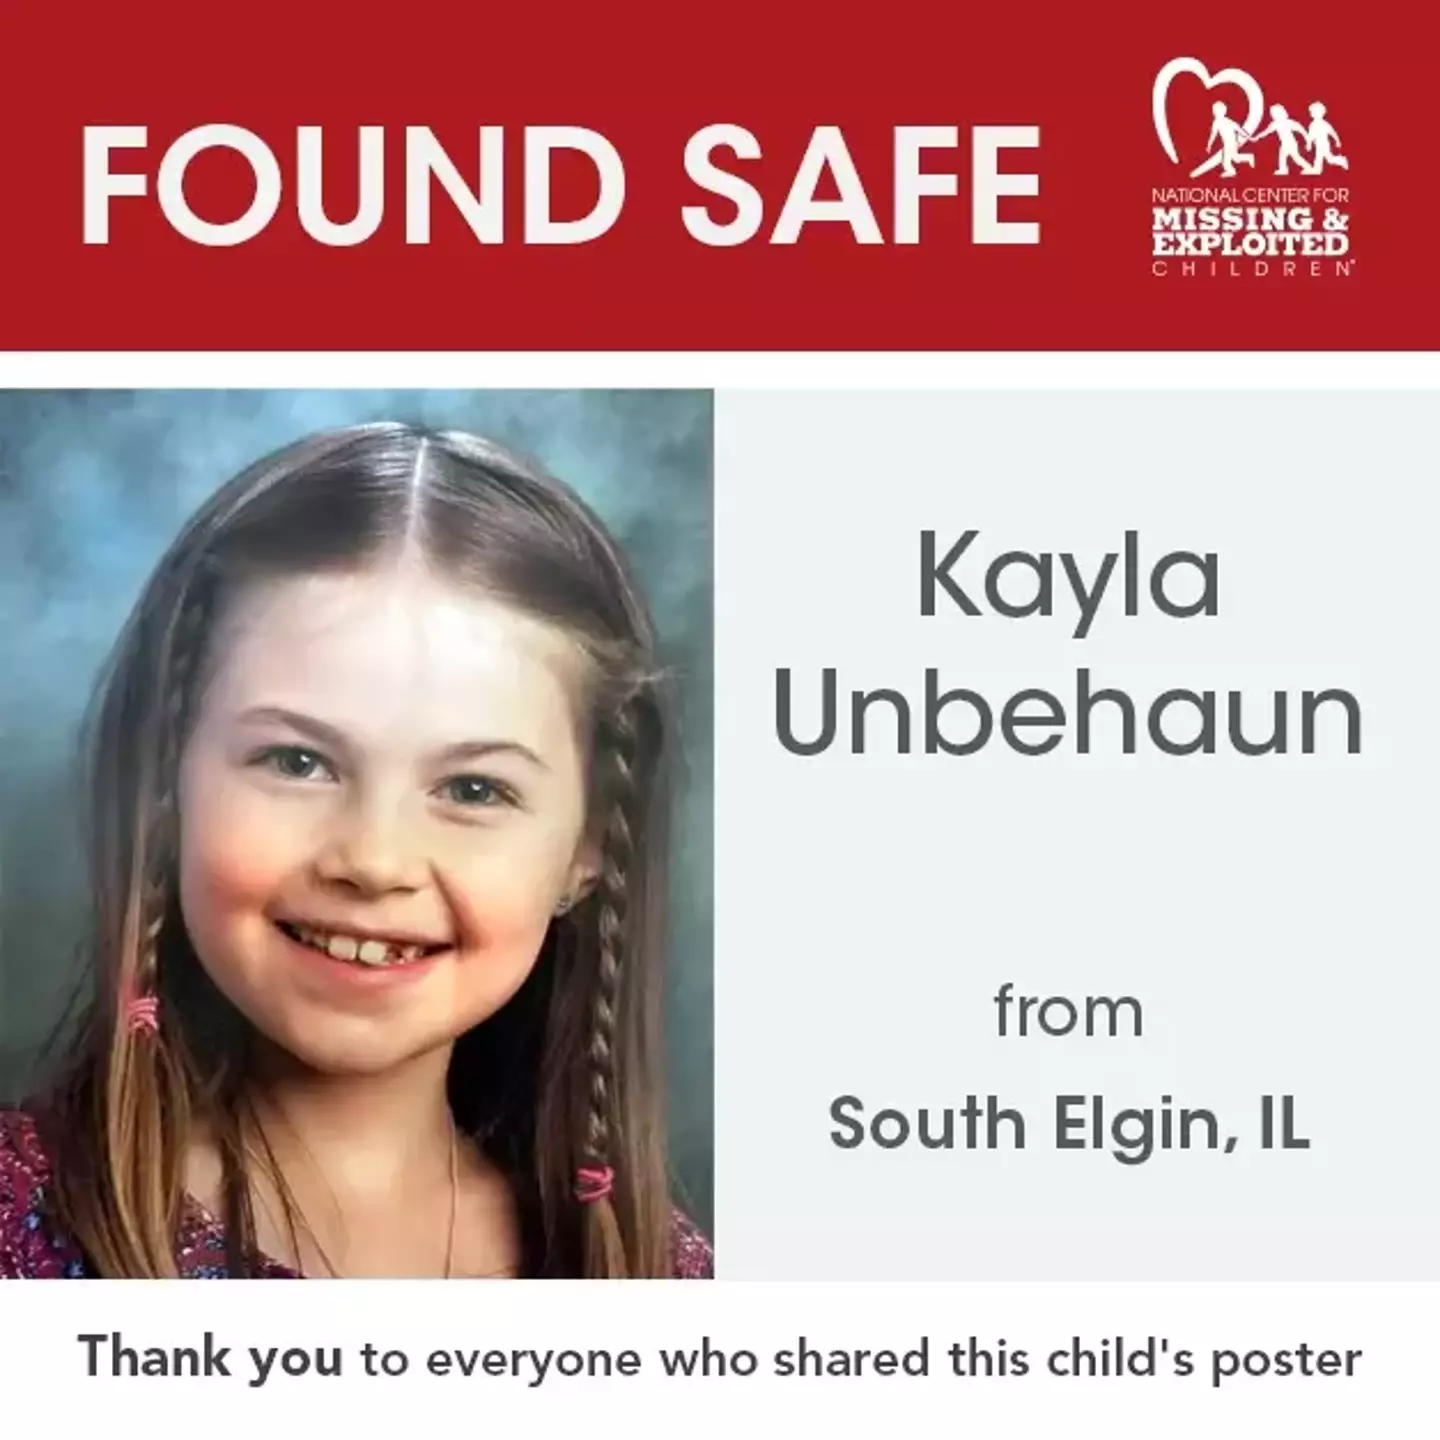 Kayla was spotted by a member of the public six years after her disappearance.